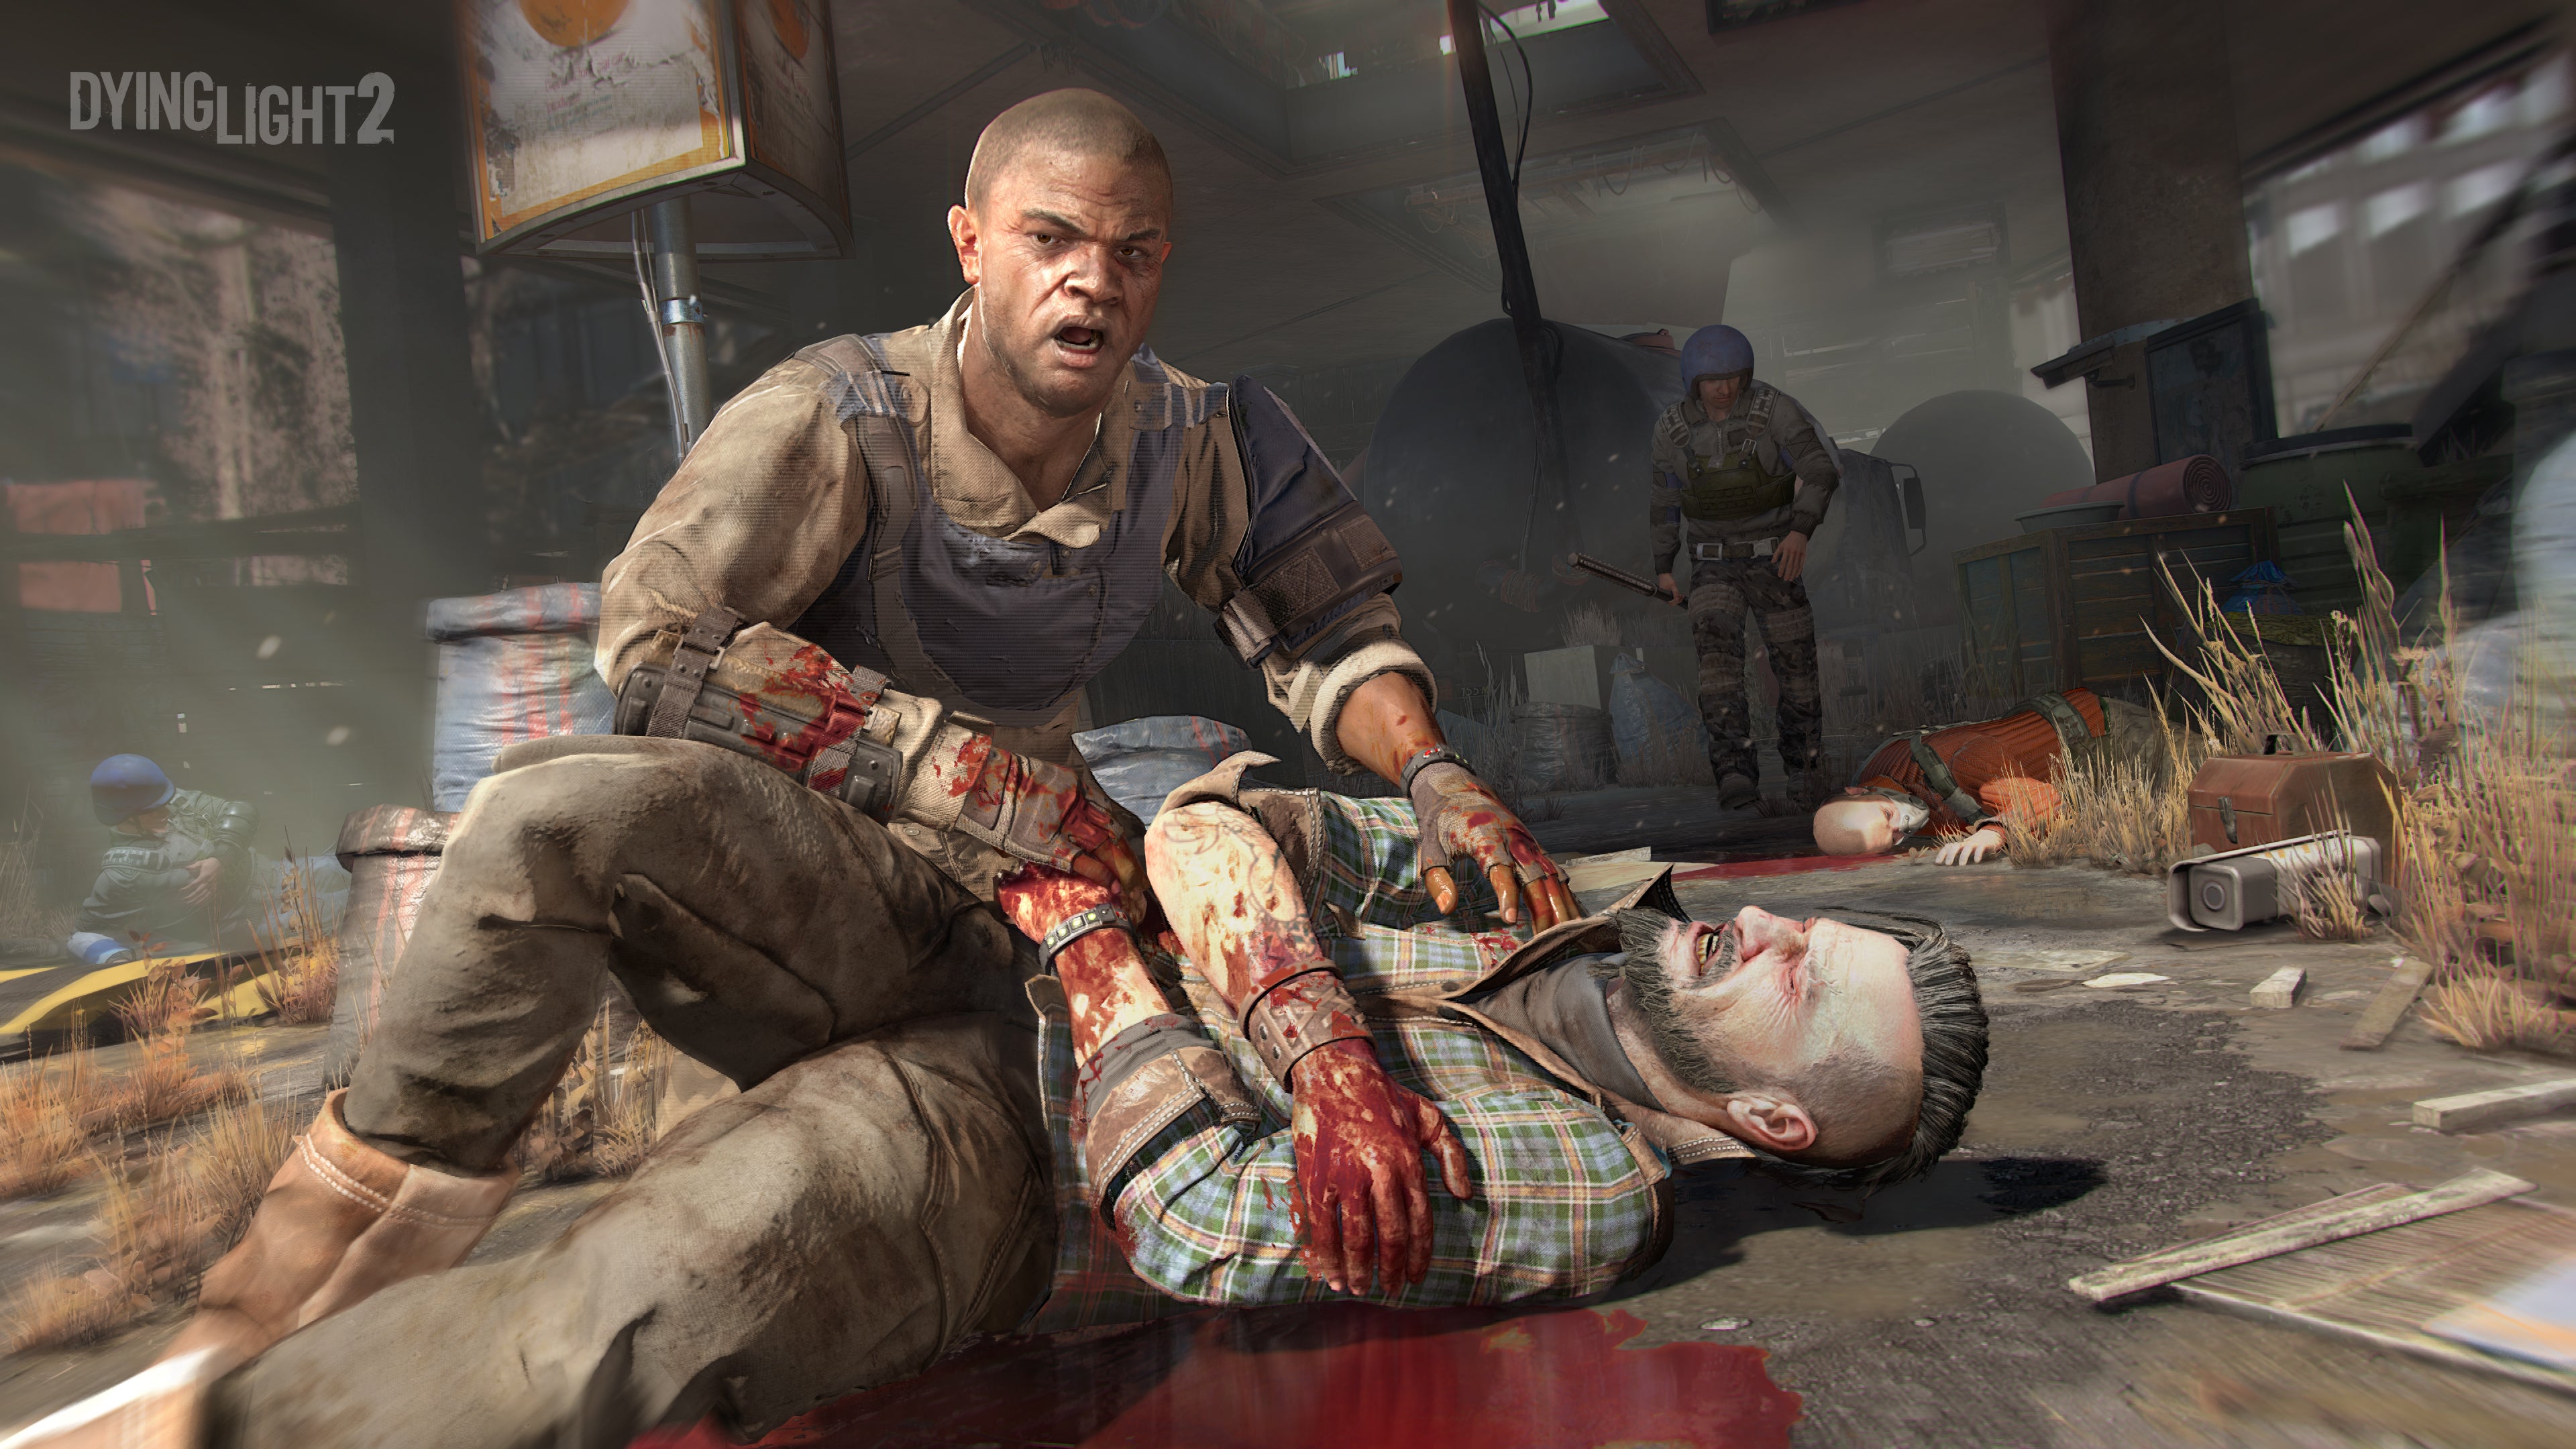 Image for Dying Light 2 is 'far from being in dev hell', says Techland